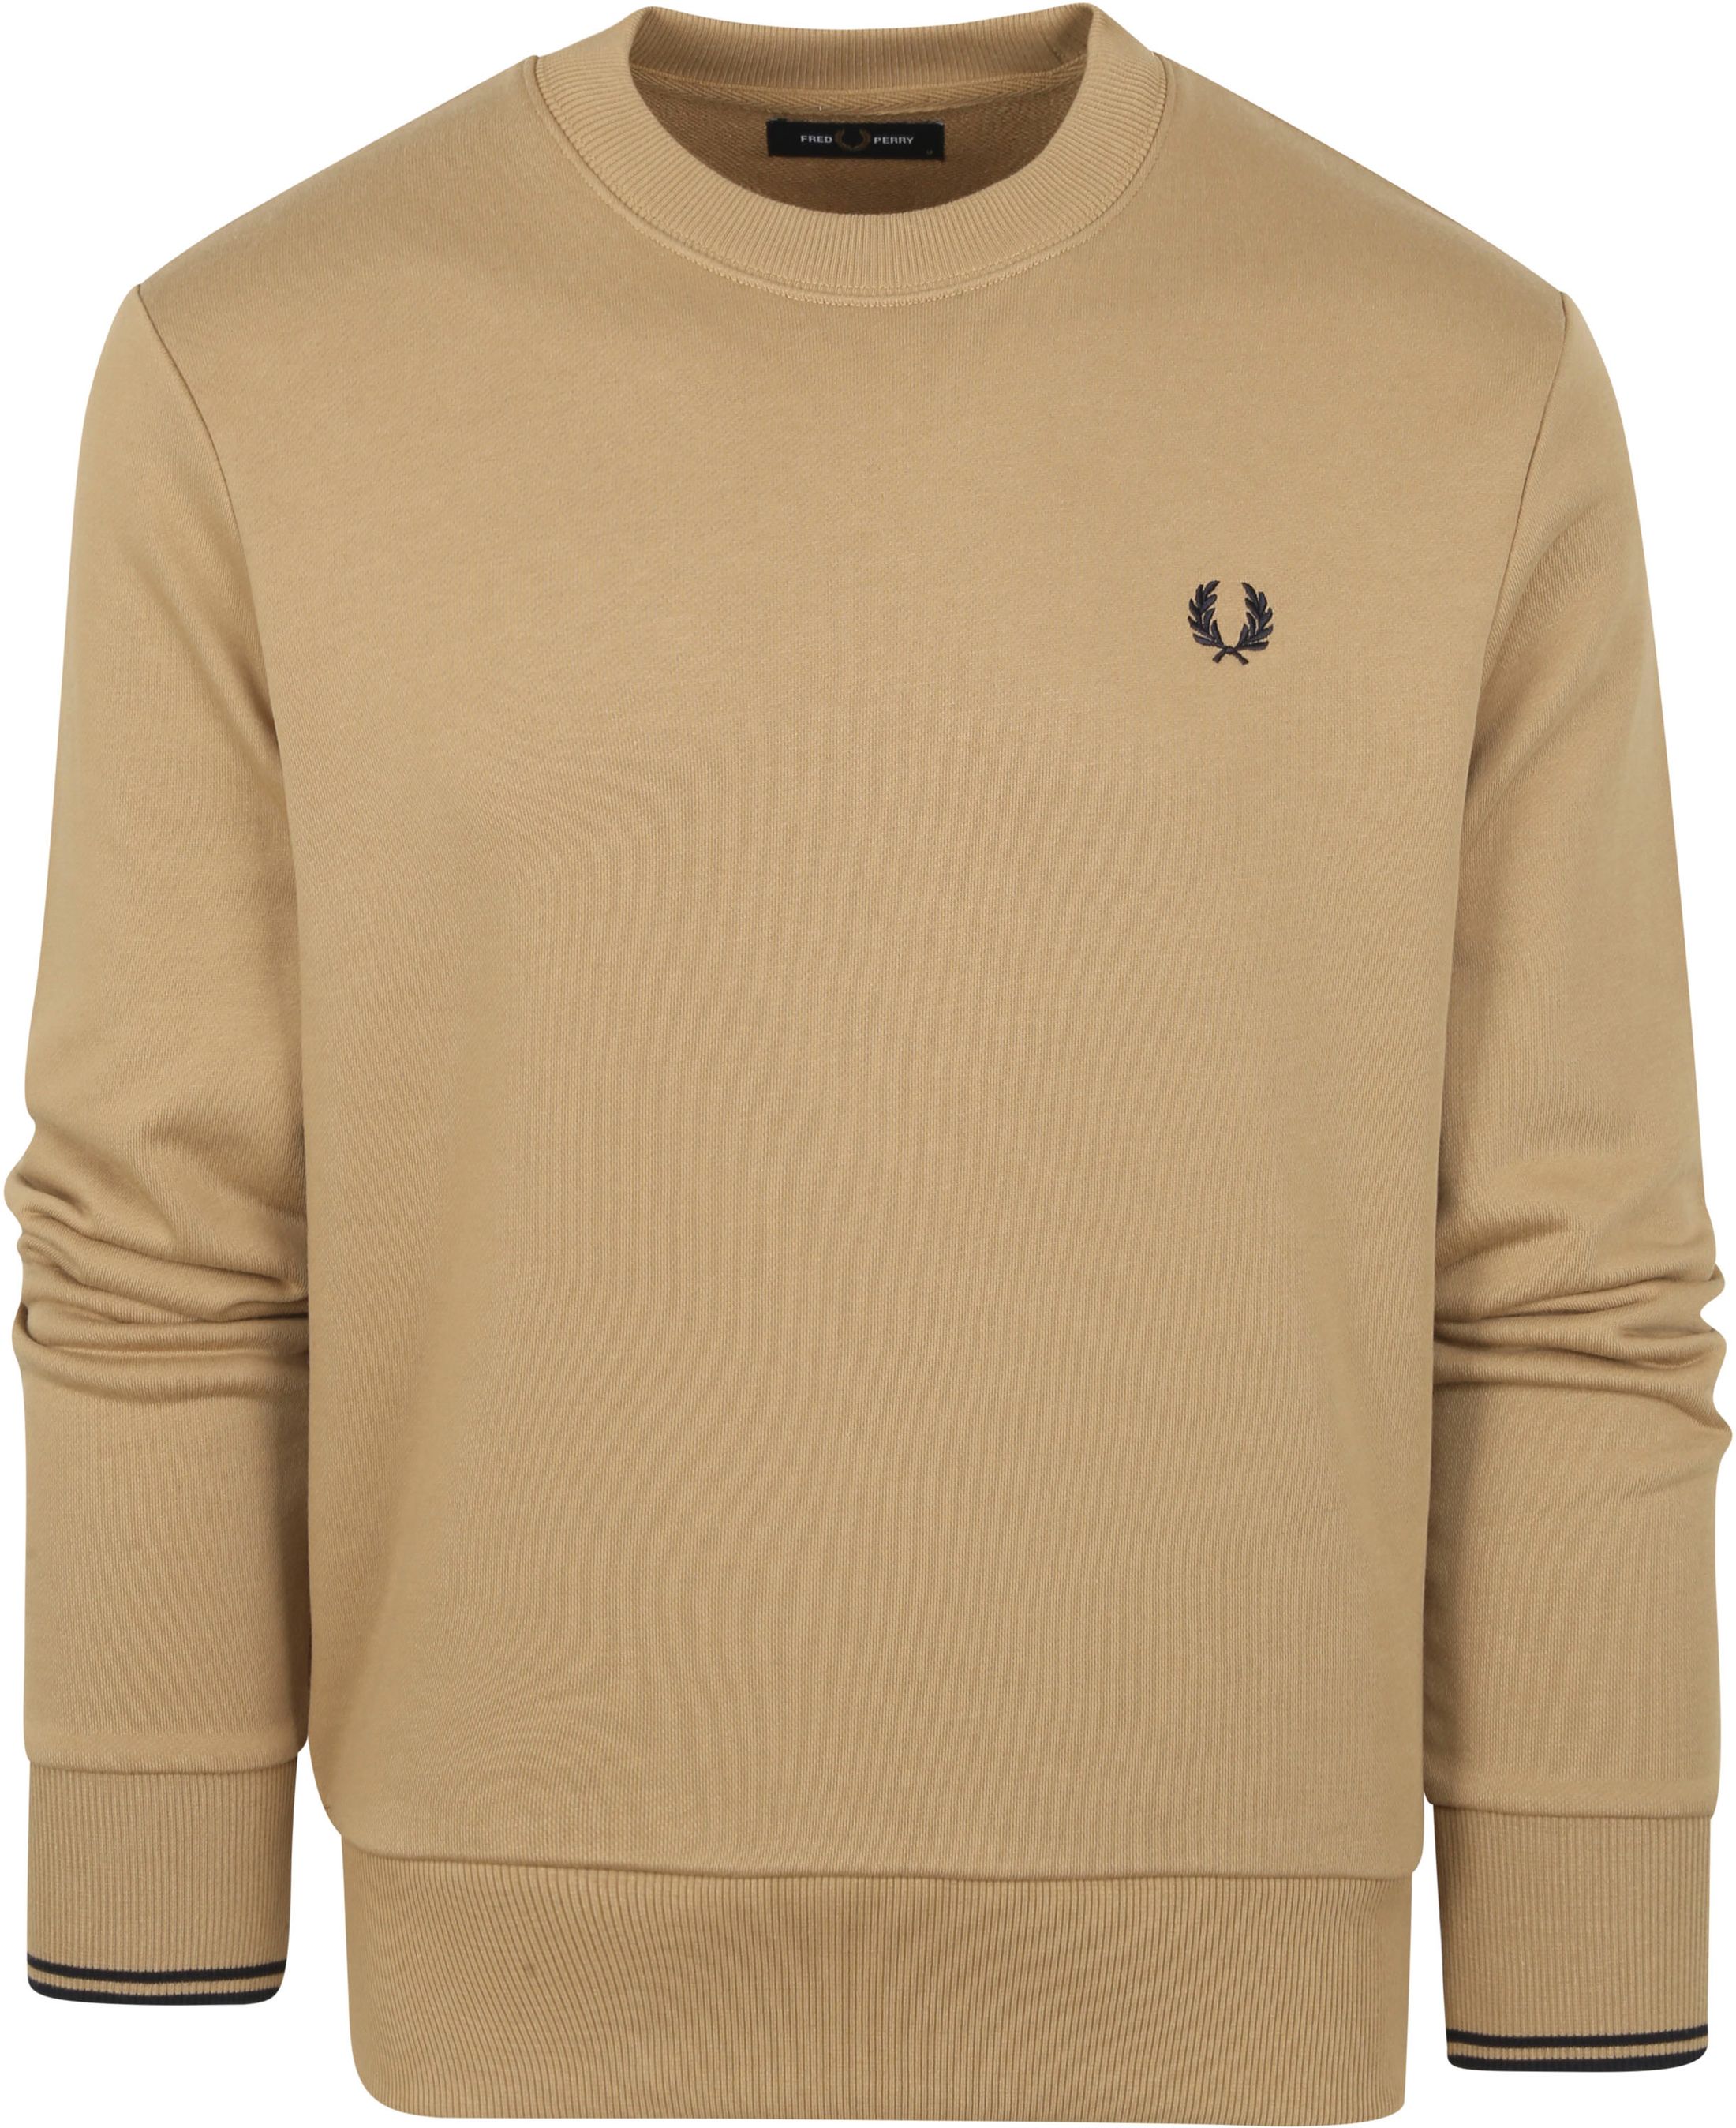 Fred Perry Sweater Logo Stone Beige size L